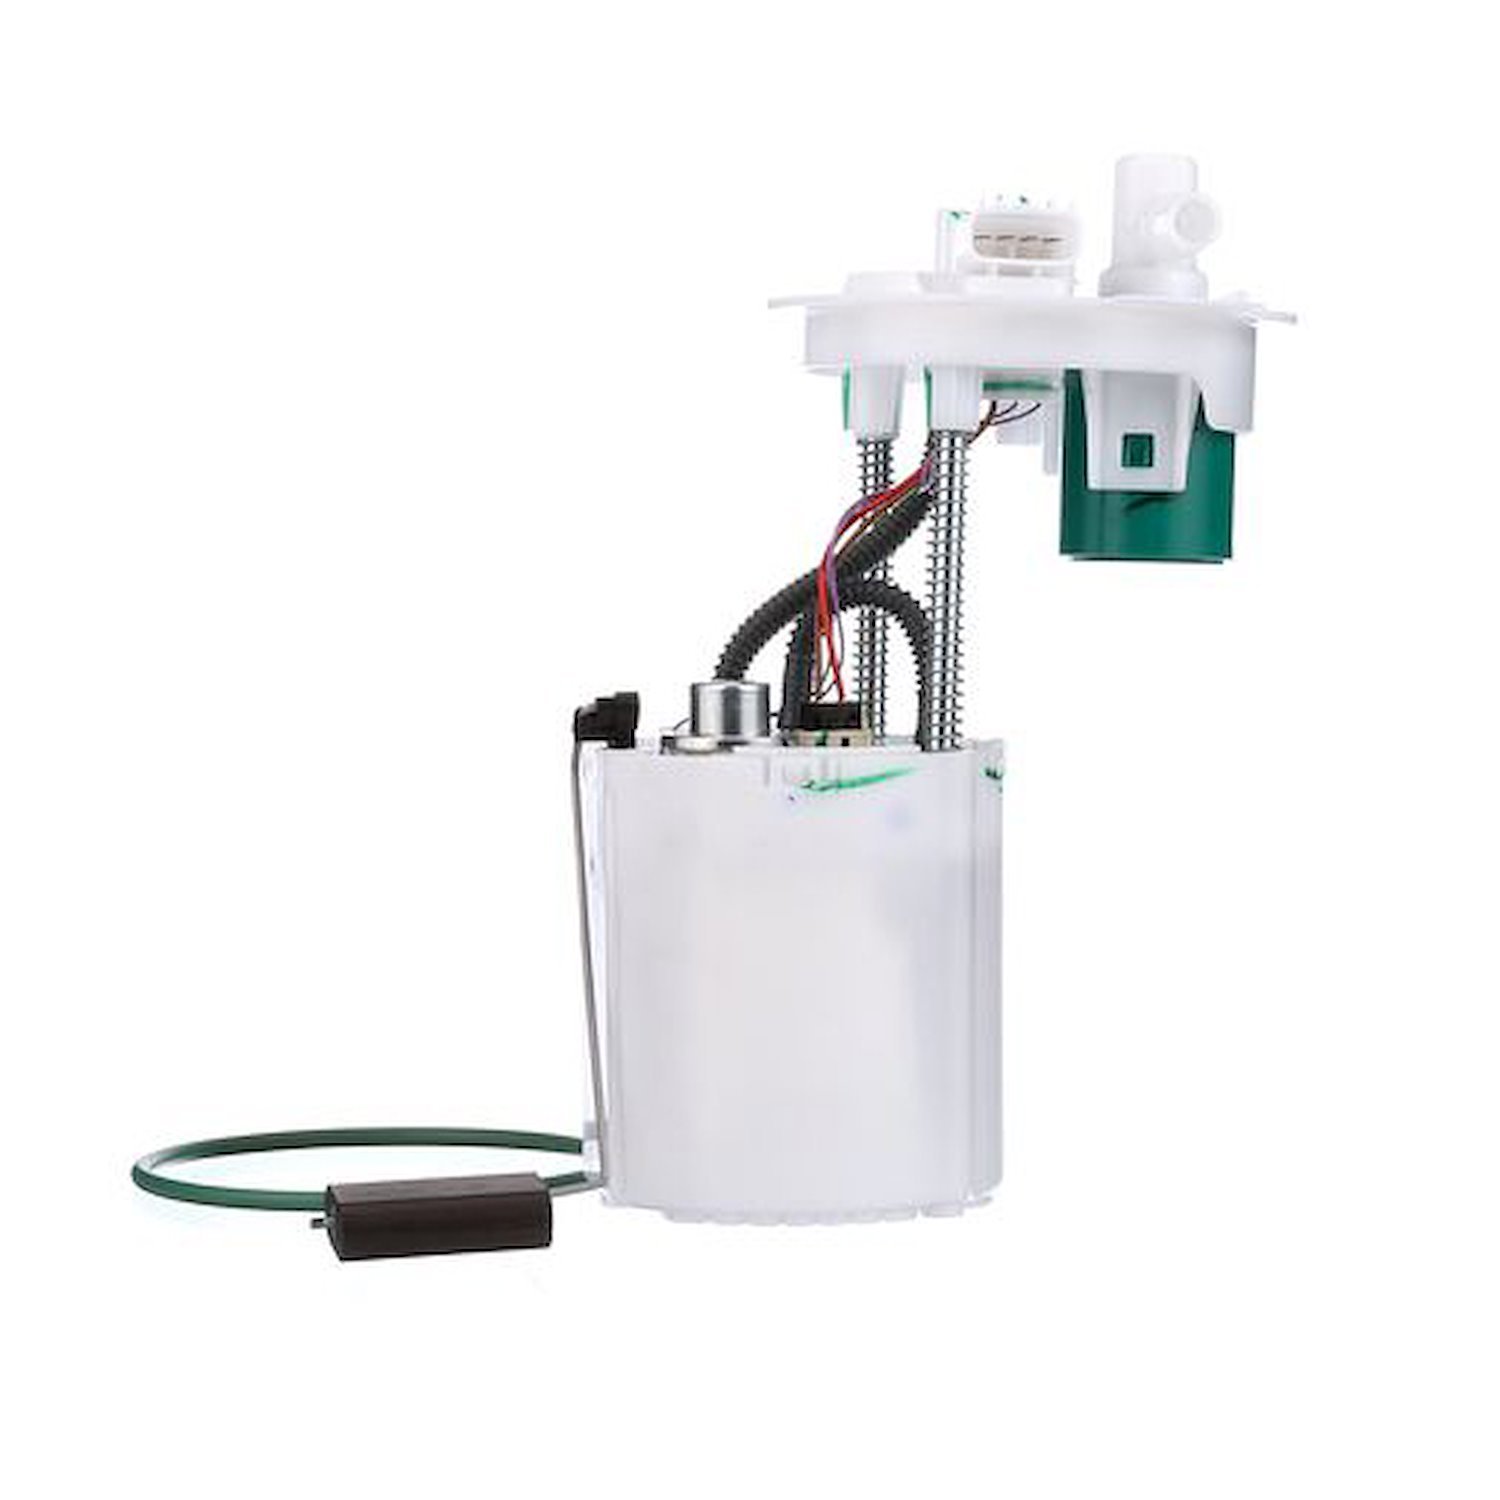 OE GM Replacement Electric Fuel Pump Module Assembly for 2011 Buick LaCrosse/2011-2012 Buick Regal/2014-2015 Cadillac XTS/2013,2